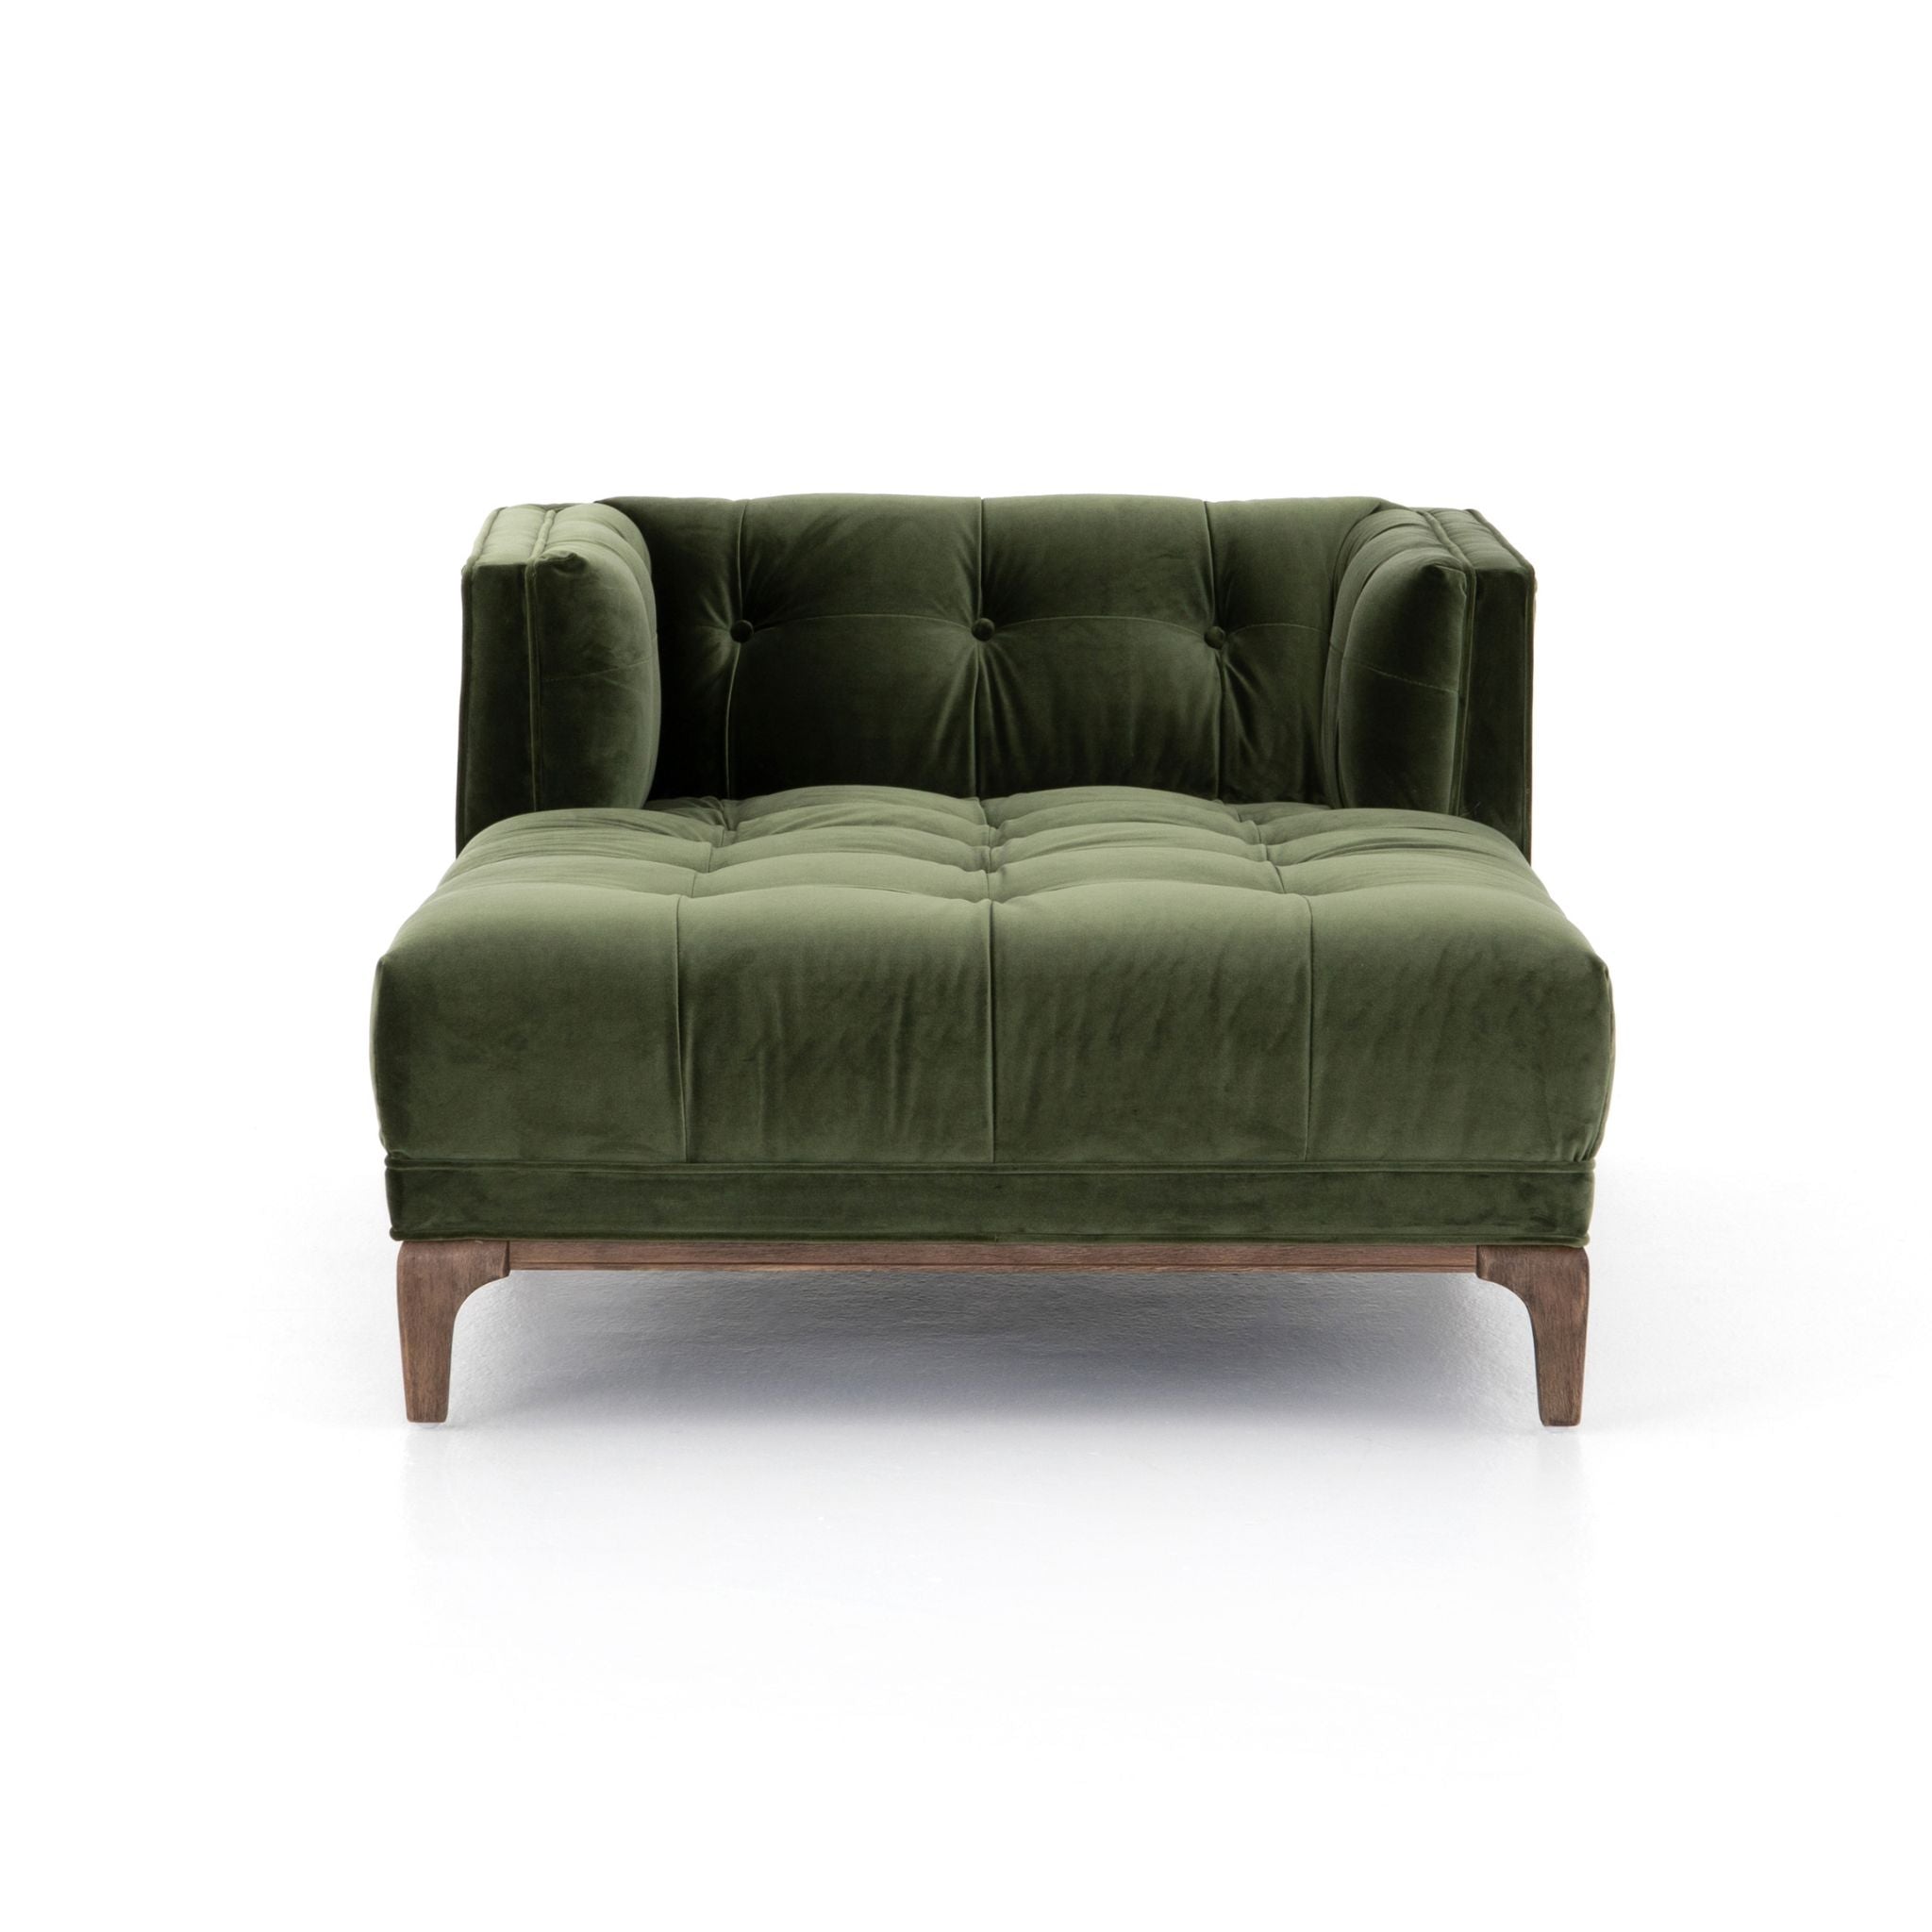 DYLAN CHAISE LOUNGE -OLIVE